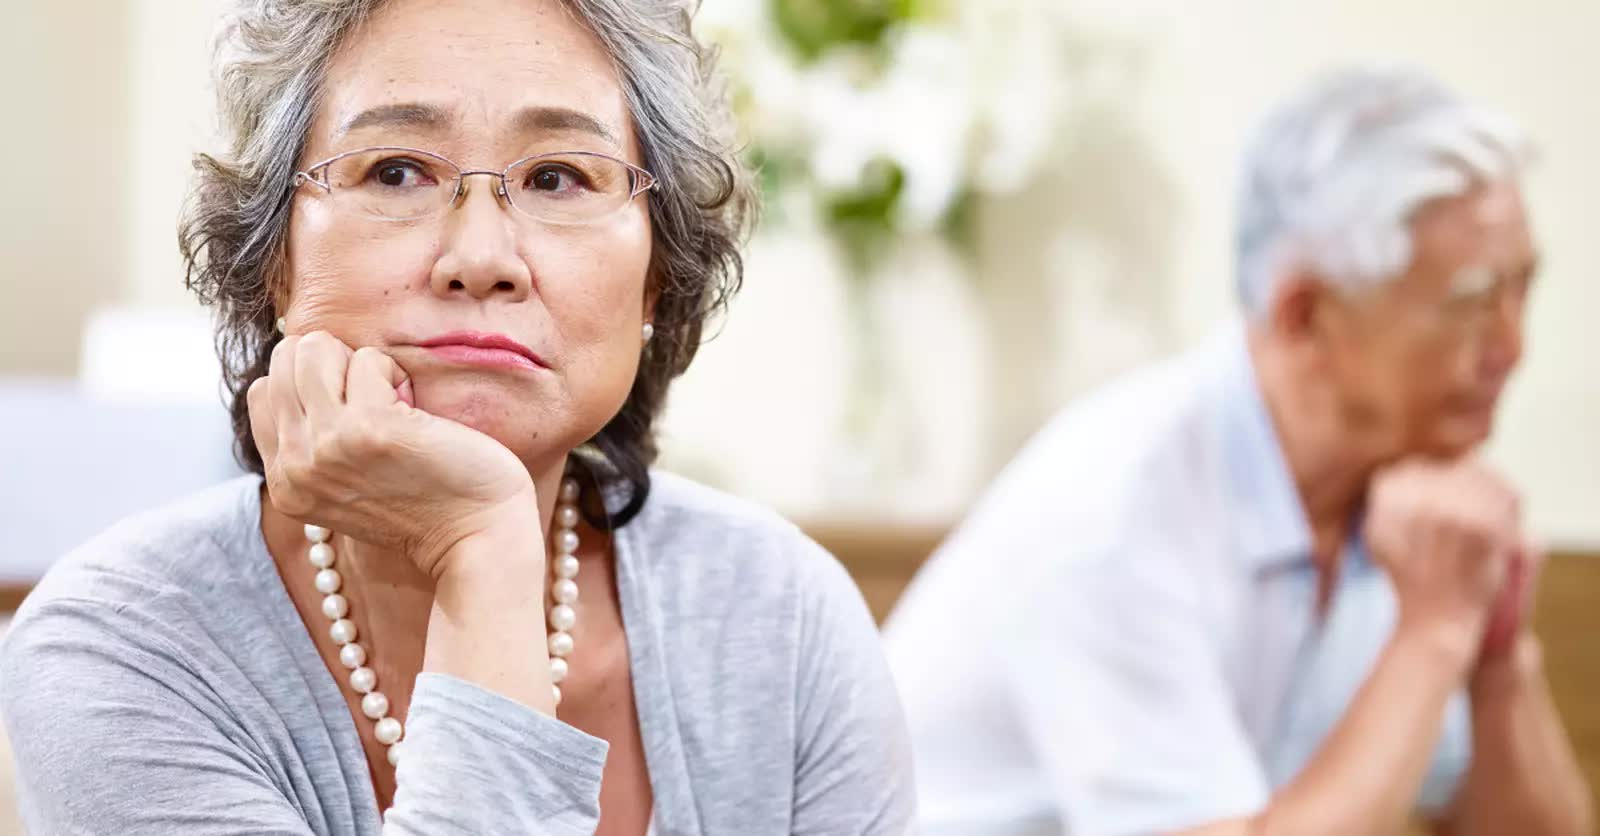 Elderly woman looking frustrated with her husband in the background